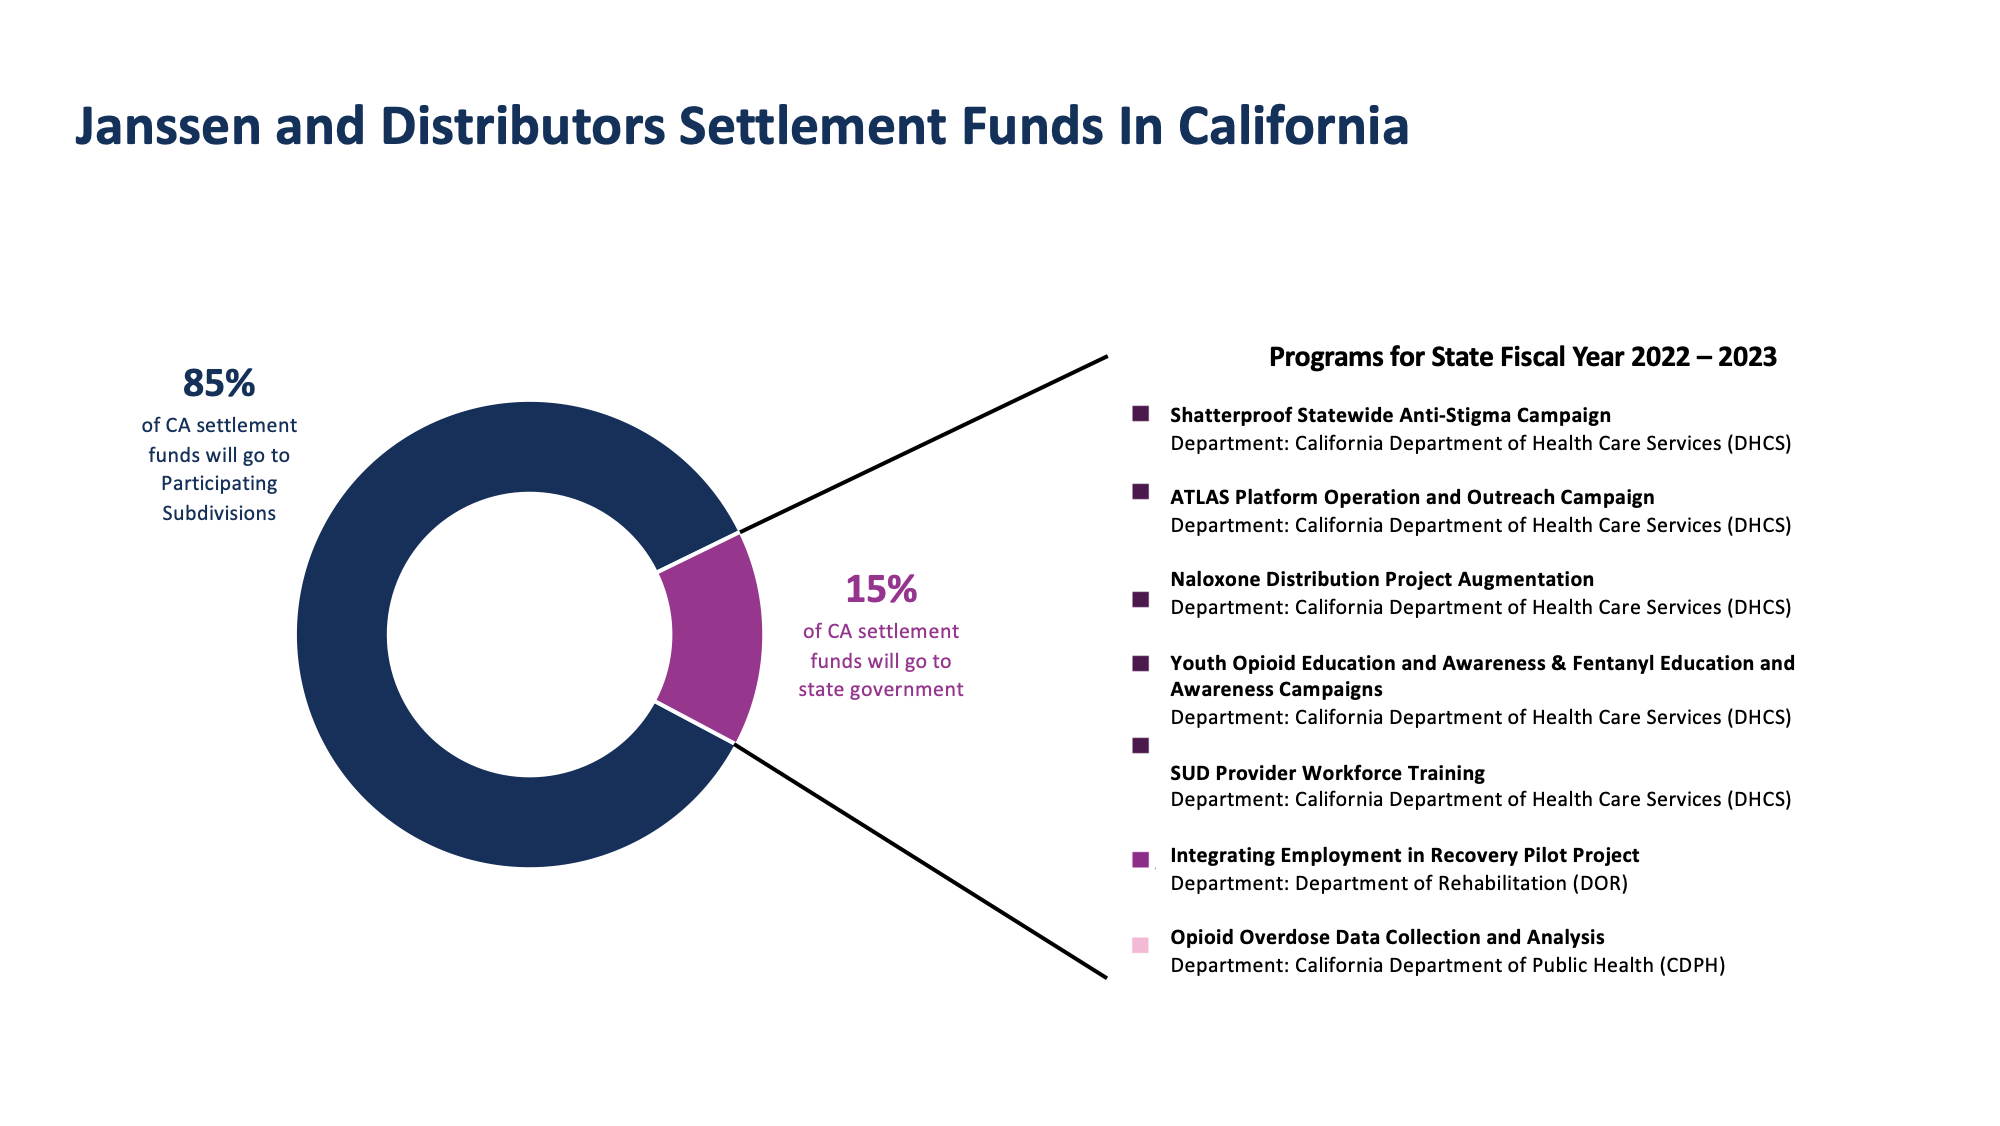 Distribution of J&D Settlement Funds in California